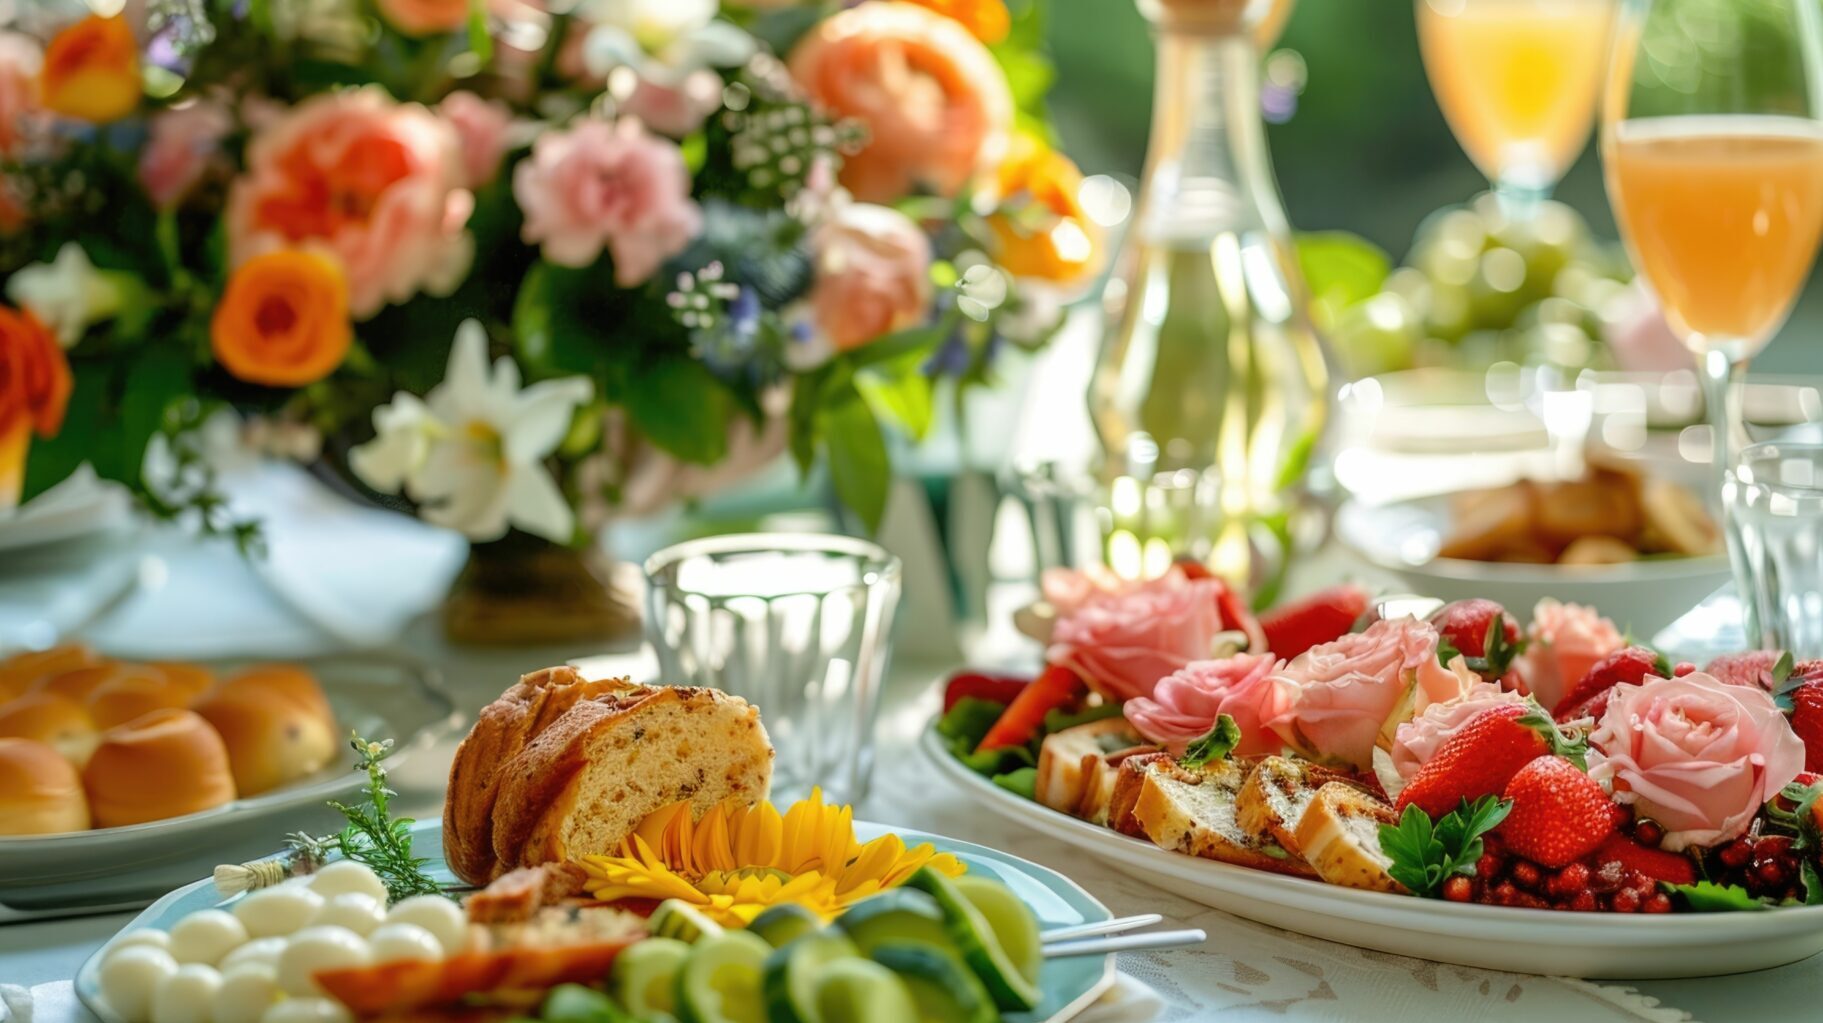 This image showcases an elegant and inviting Mother s Day brunch setting featuring a beautifully arranged table with a stunning floral centerpiece delicate glassware and an array of tempting dishes